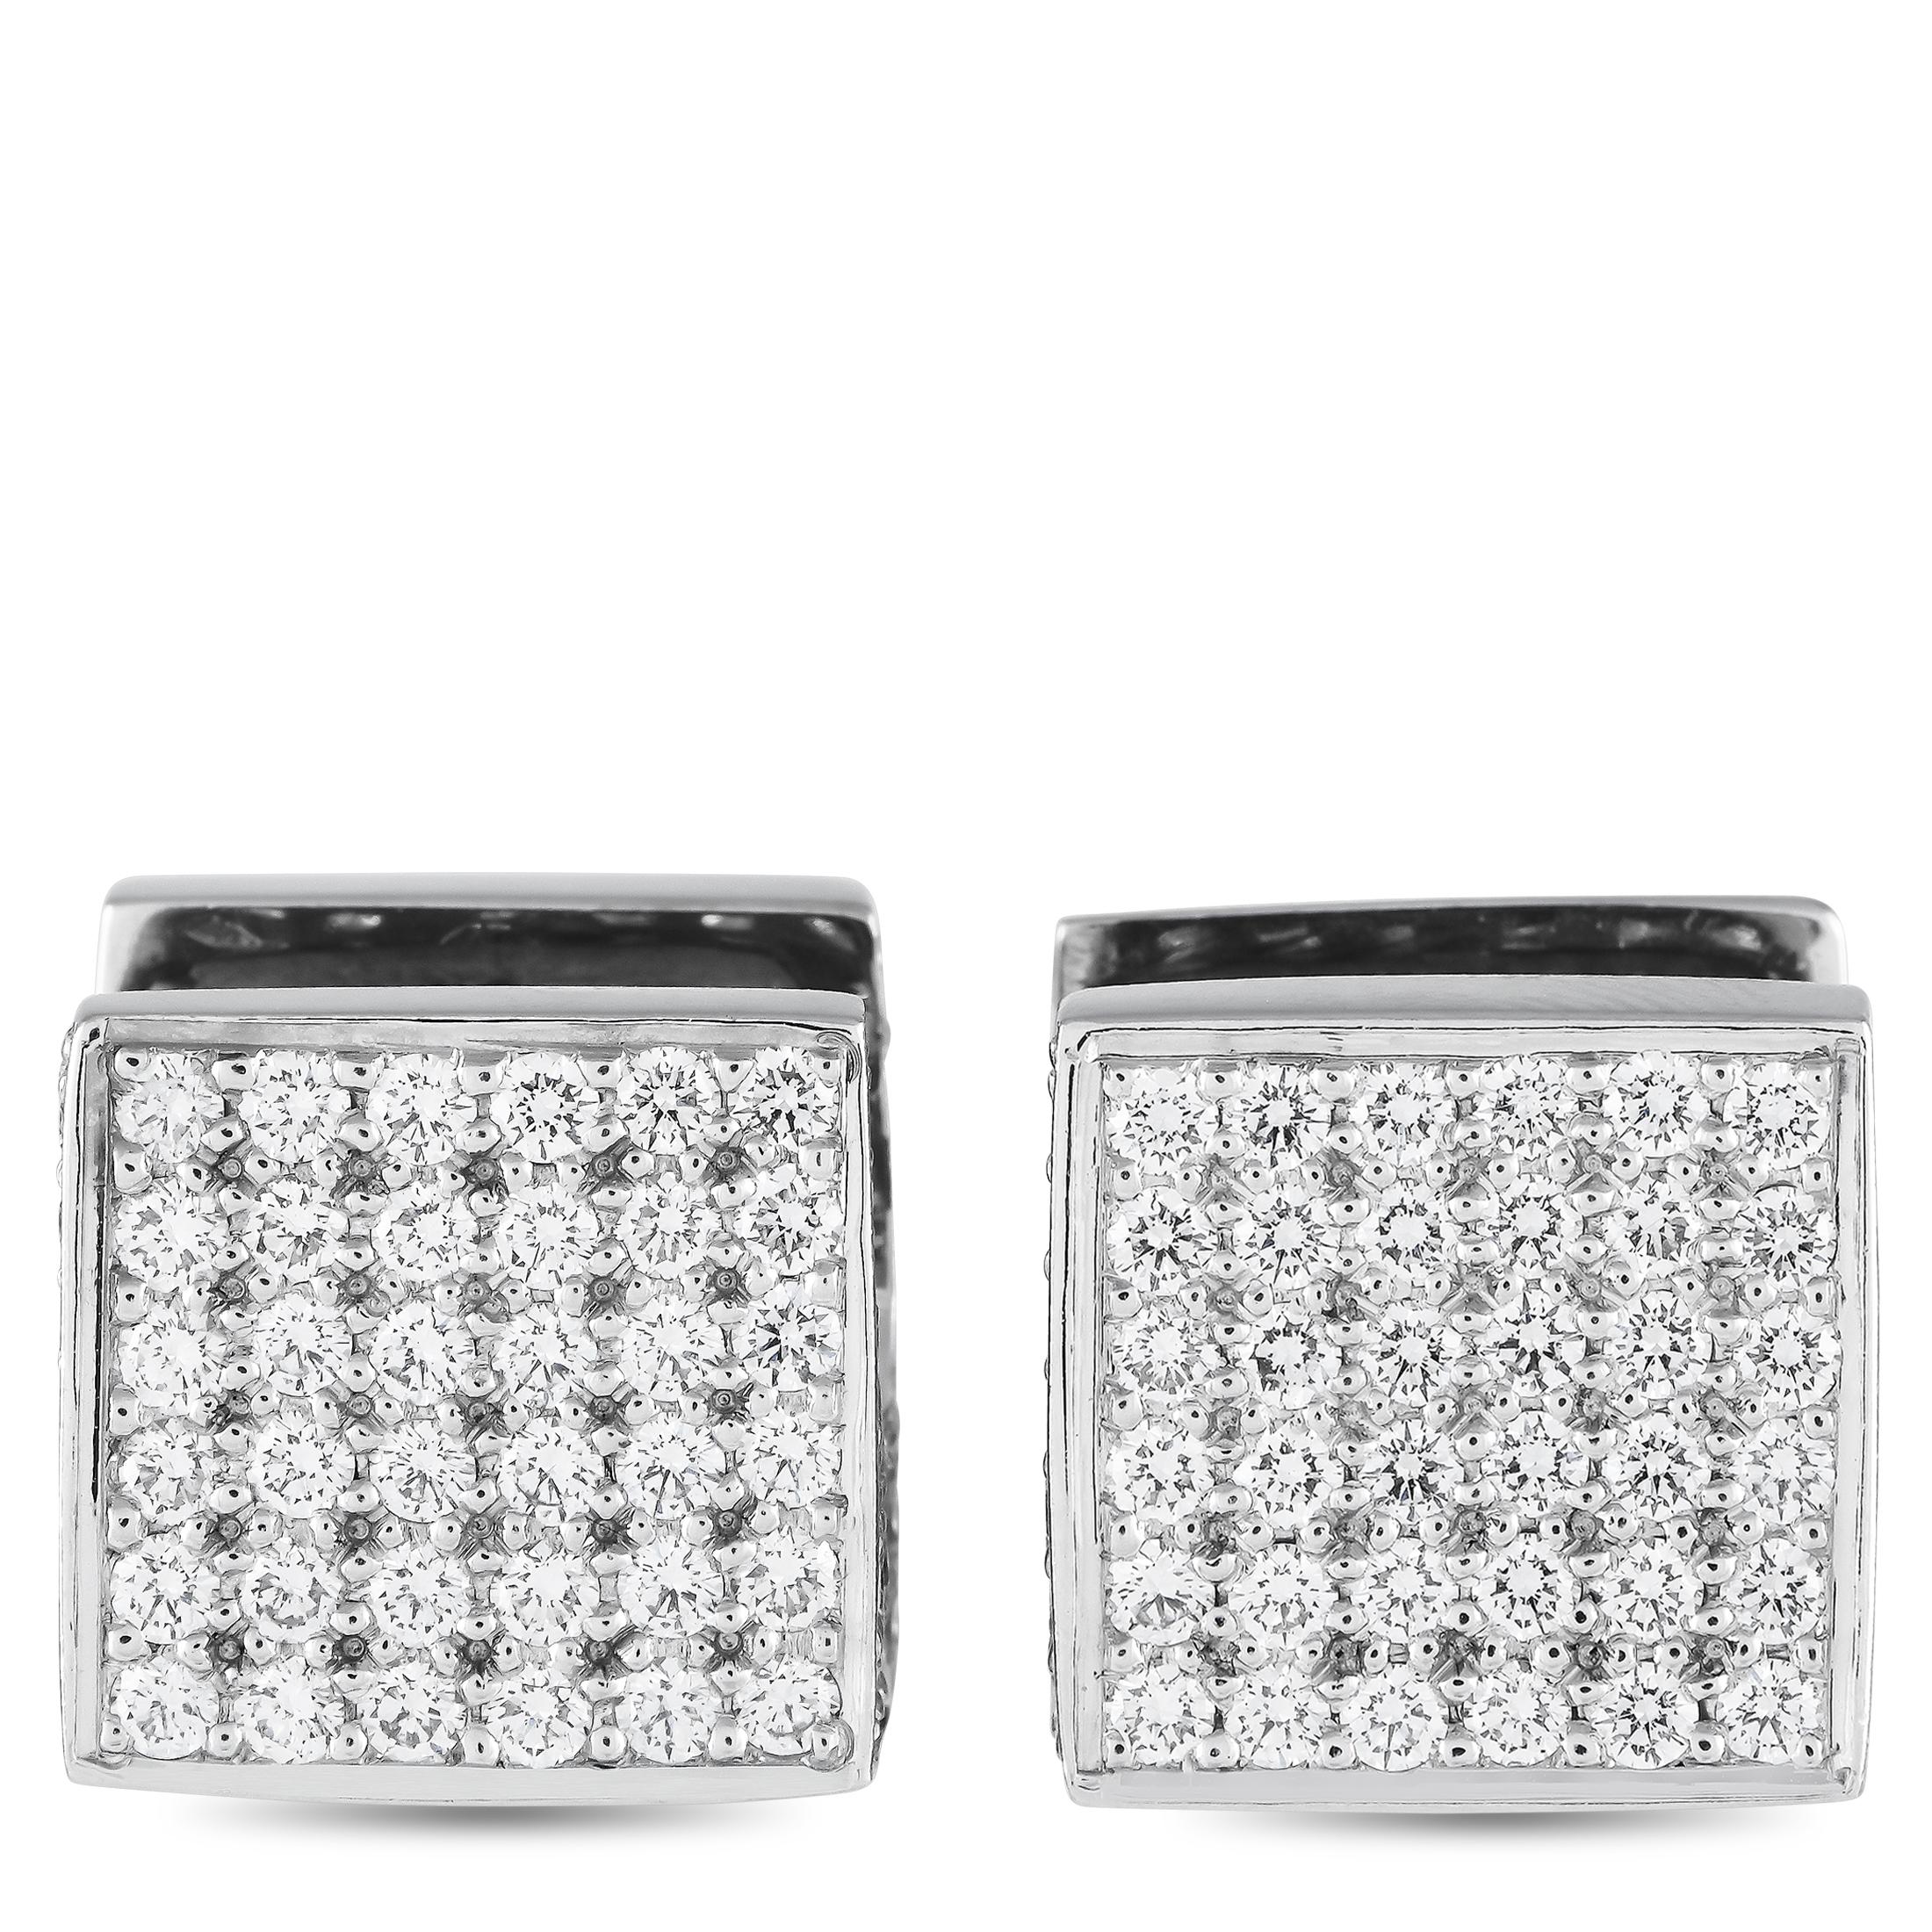 14K White Gold 1.55ct Diamond Earrings MF04-012324 In Excellent Condition For Sale In Southampton, PA